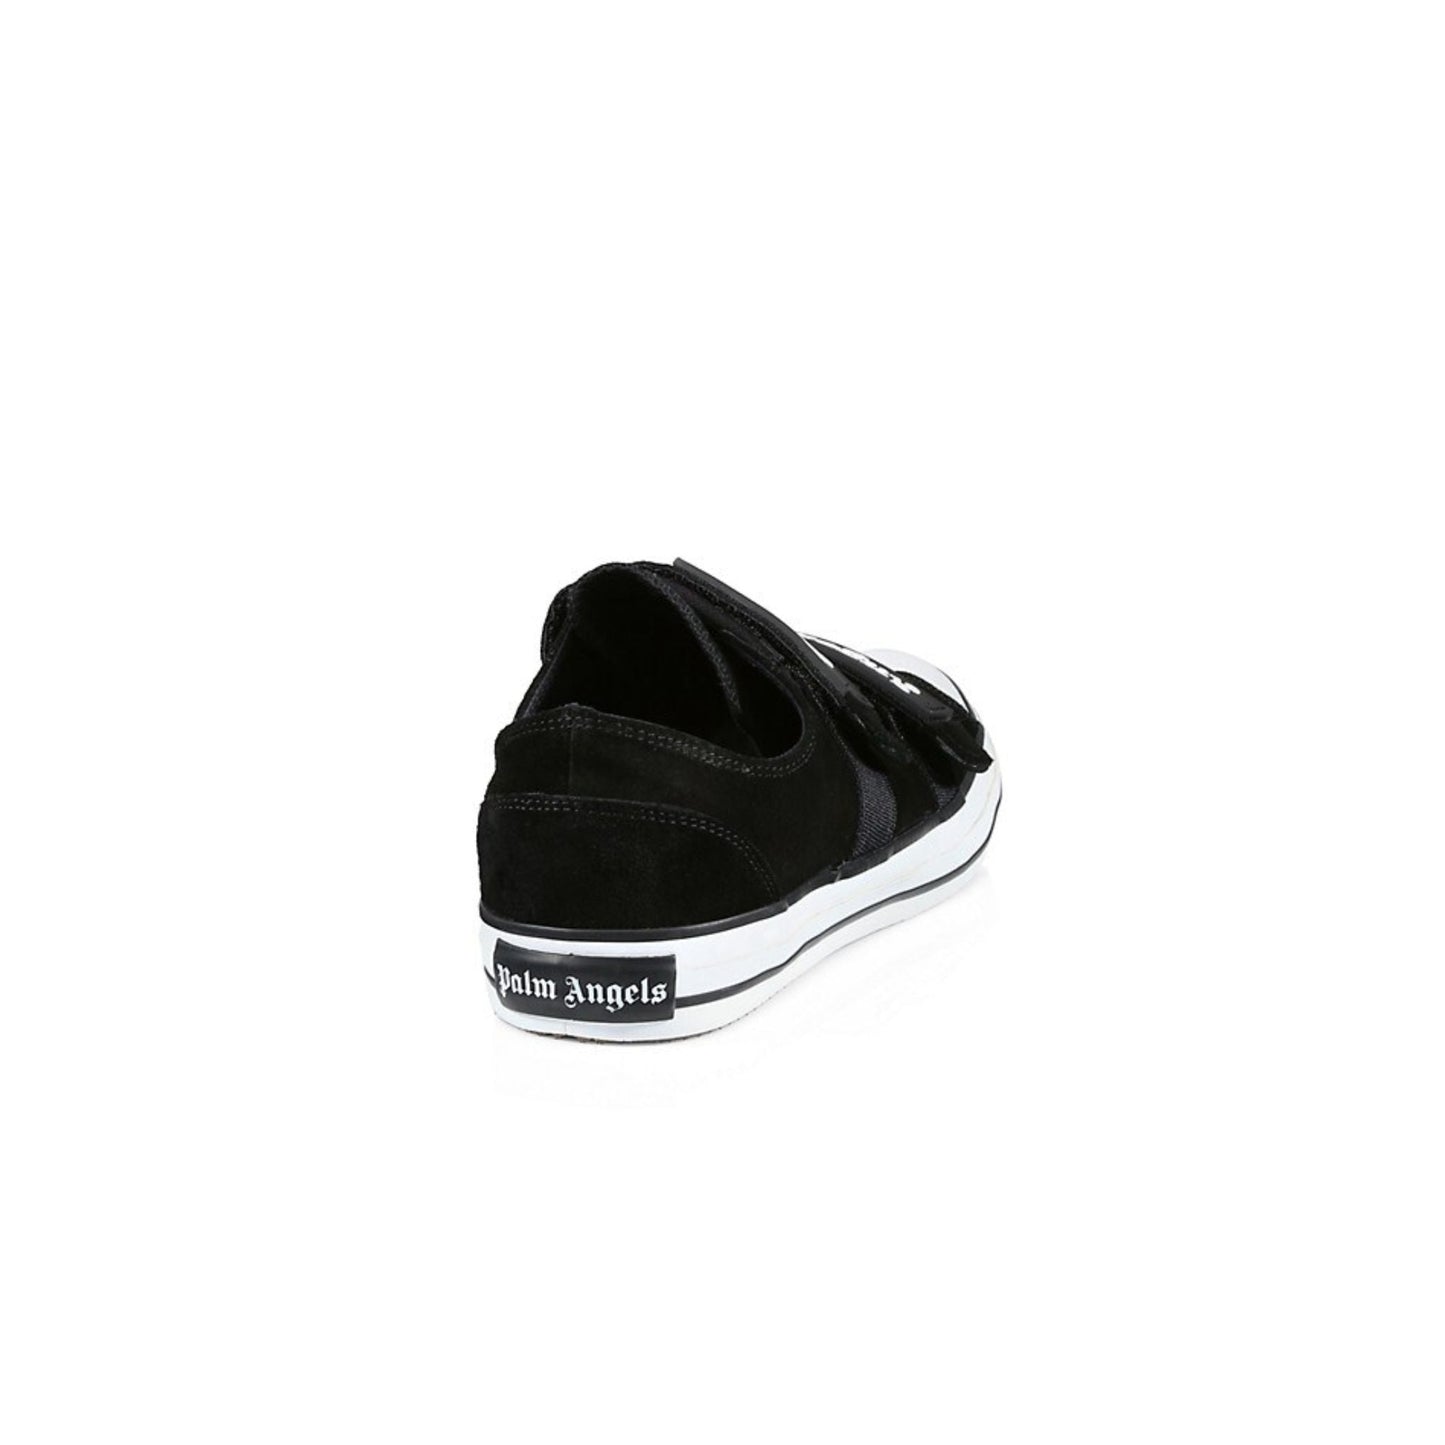 Palm Angels Vulcanized Grip-Tape Low-Top Sneakers